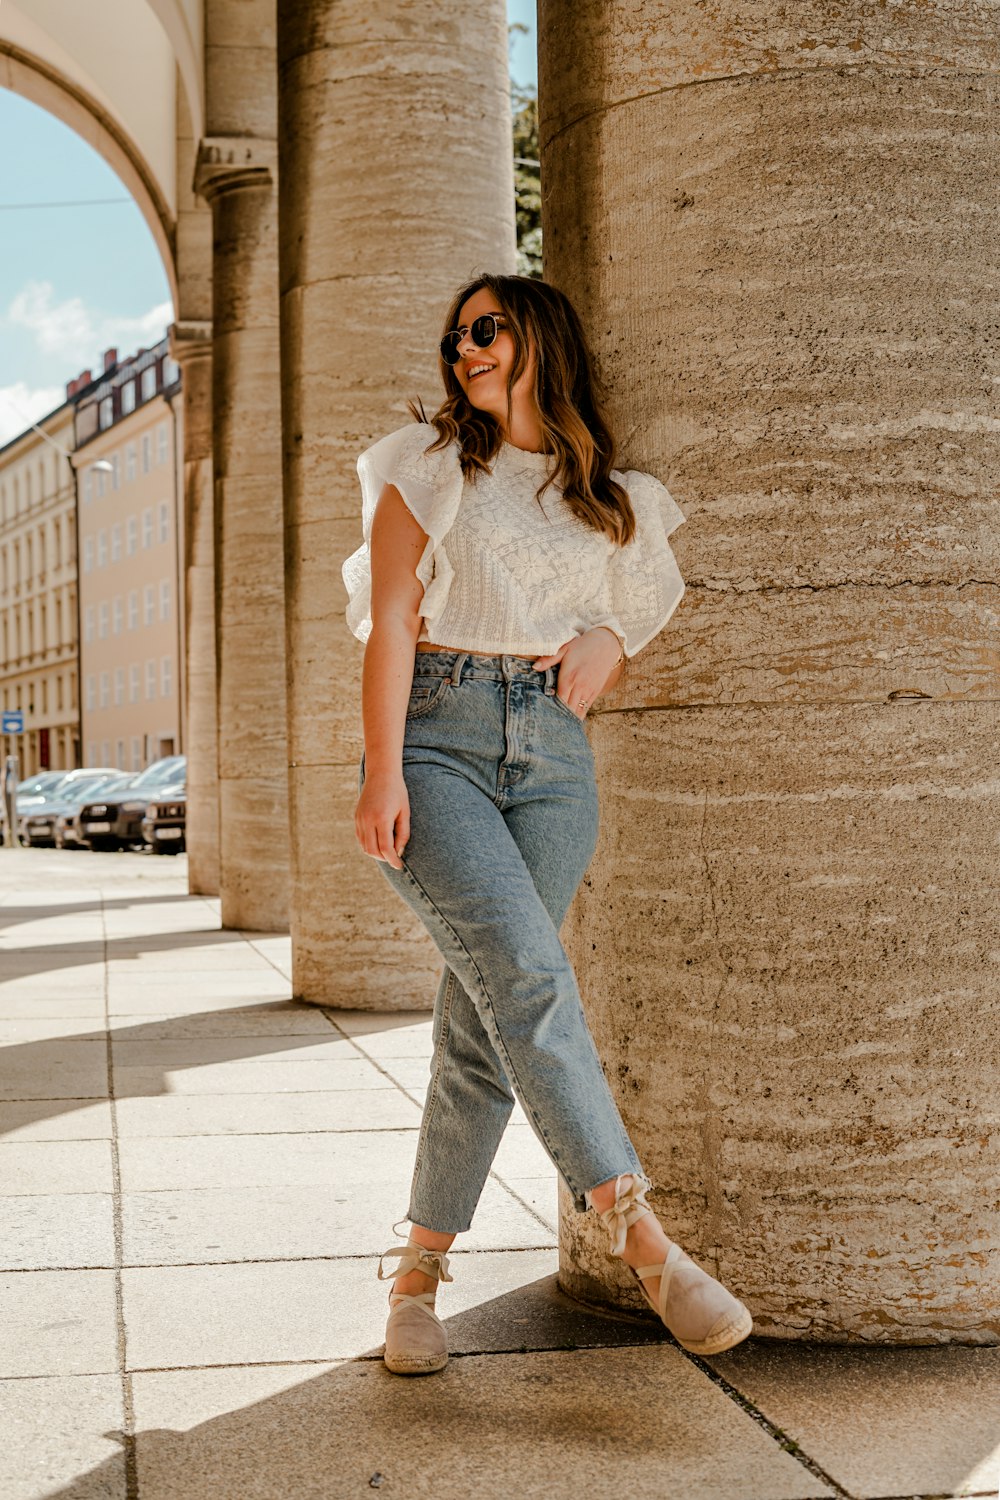 woman in white tank top and blue denim jeans standing on brown concrete  floor during daytime photo – Free Schoenen Image on Unsplash